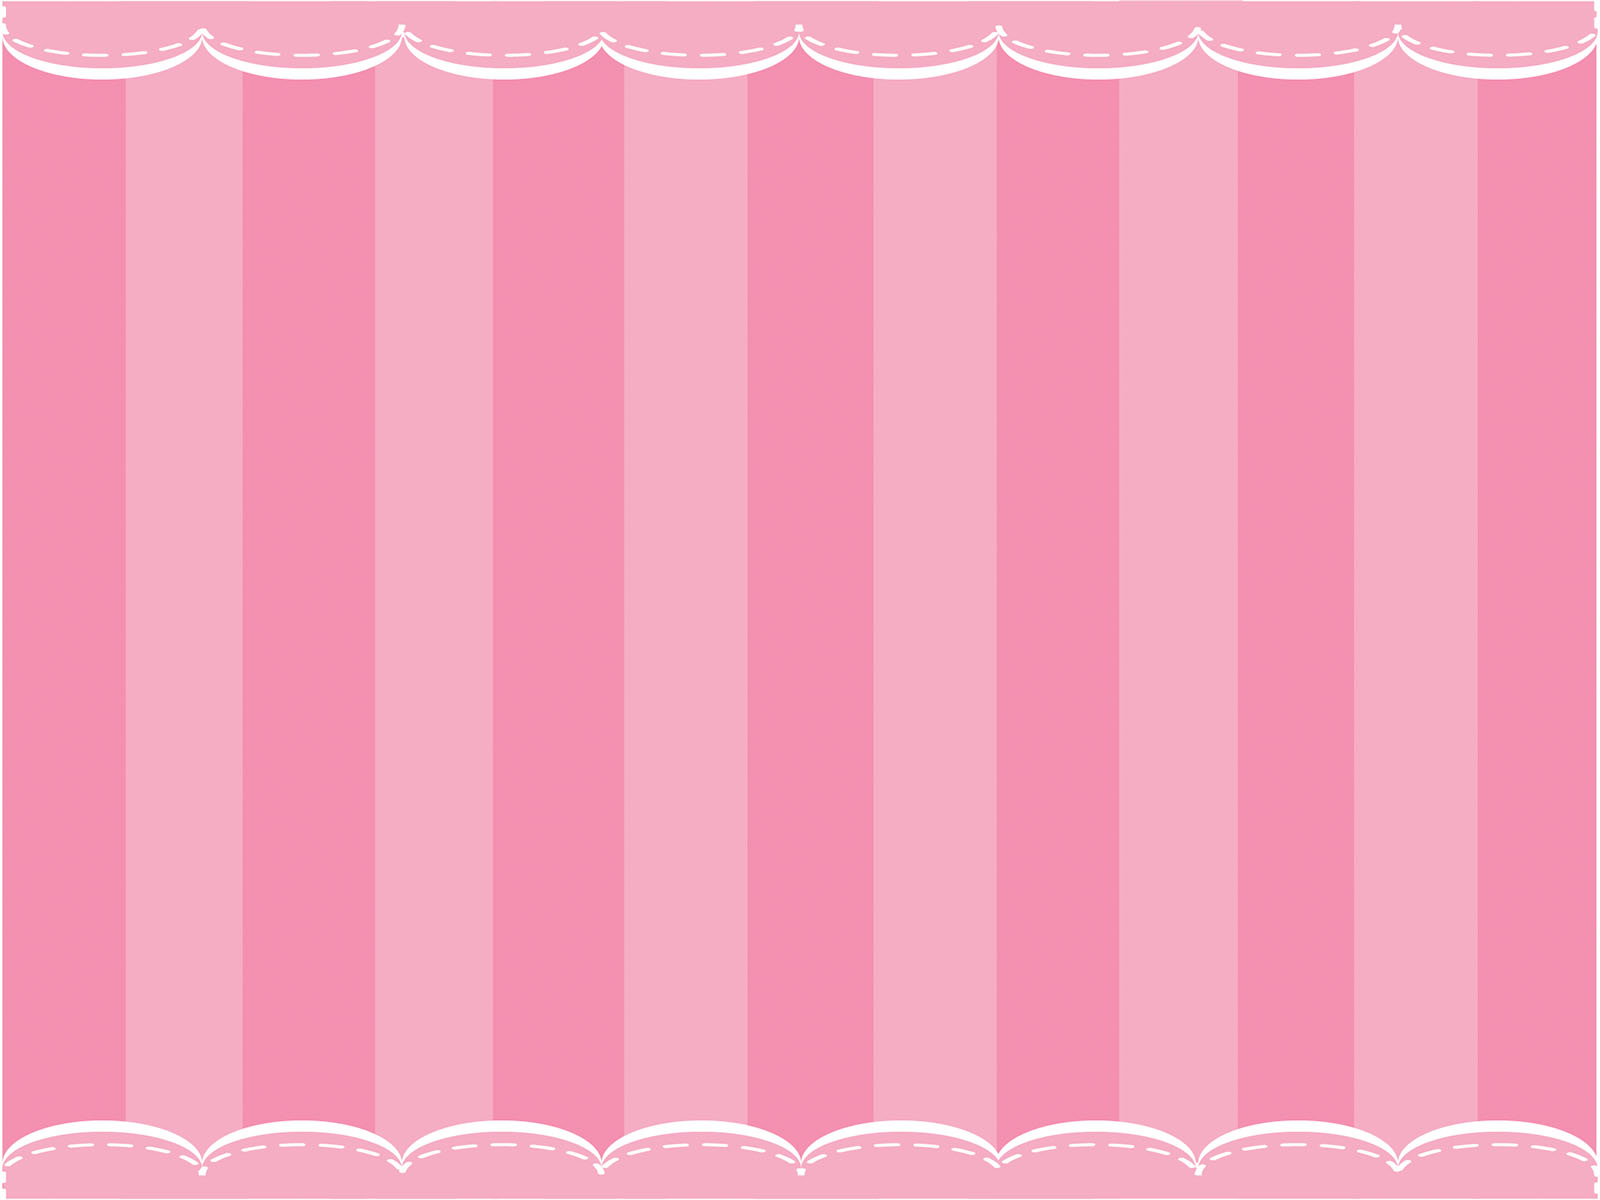 Cute Pink Curtain Background